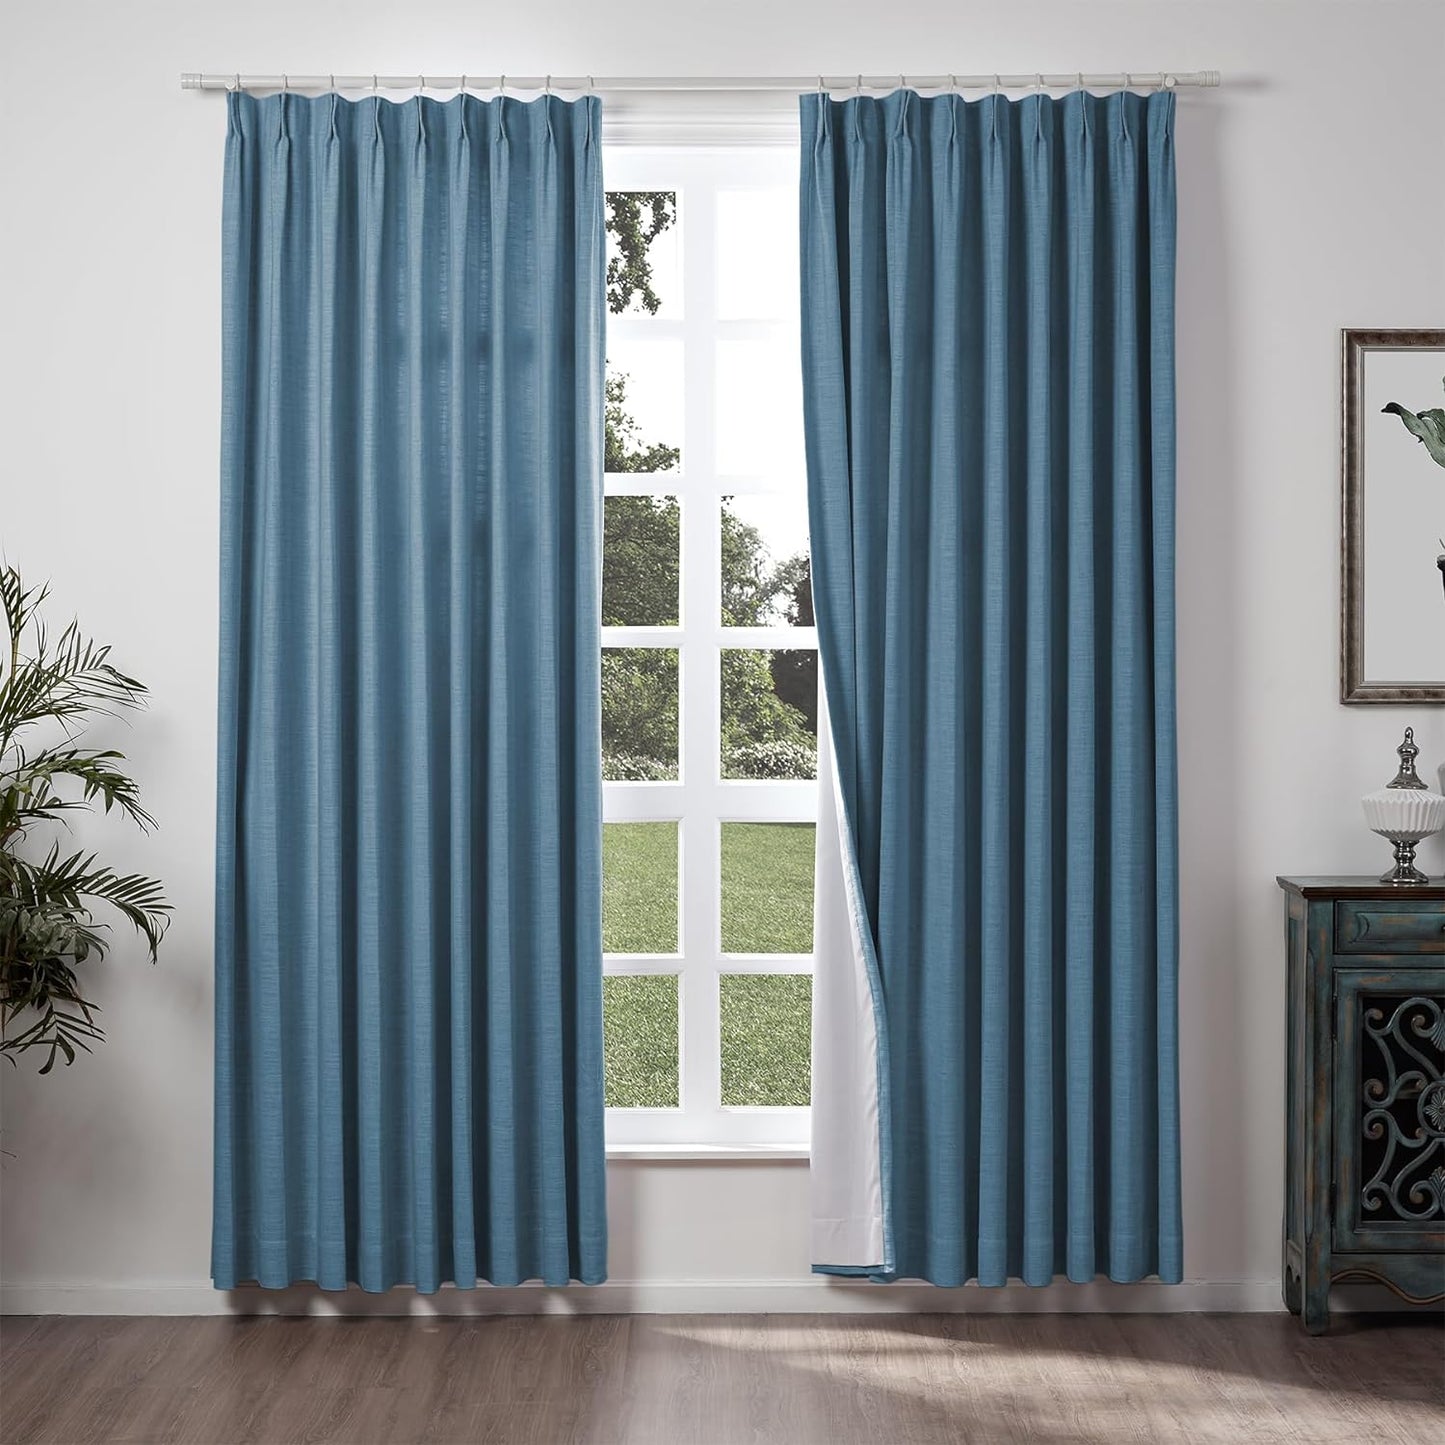 Chadmade 50" W X 63" L Polyester Linen Drape with Blackout Lining Pinch Pleat Curtain for Sliding Door Patio Door Living Room Bedroom, (1 Panel) Sand Beige Tallis Collection  ChadMade Aegean Blue (35) 100Wx84L 